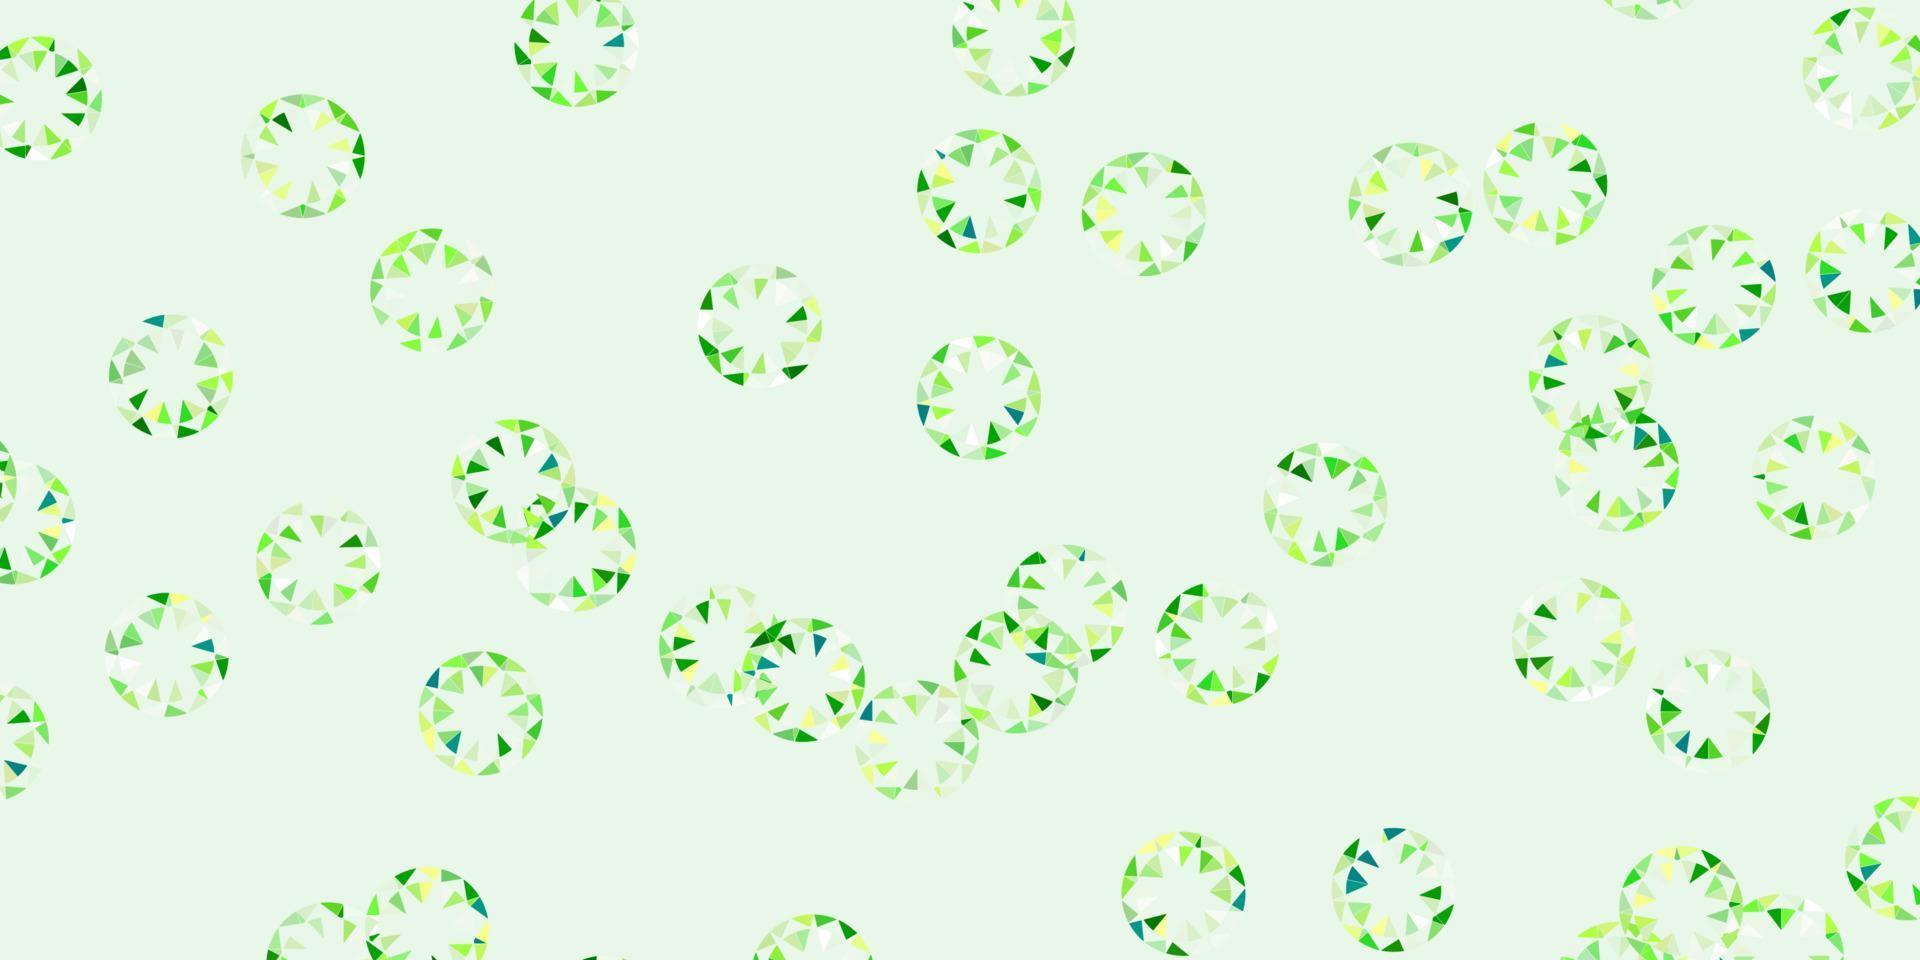 Light green, yellow vector template with circles.